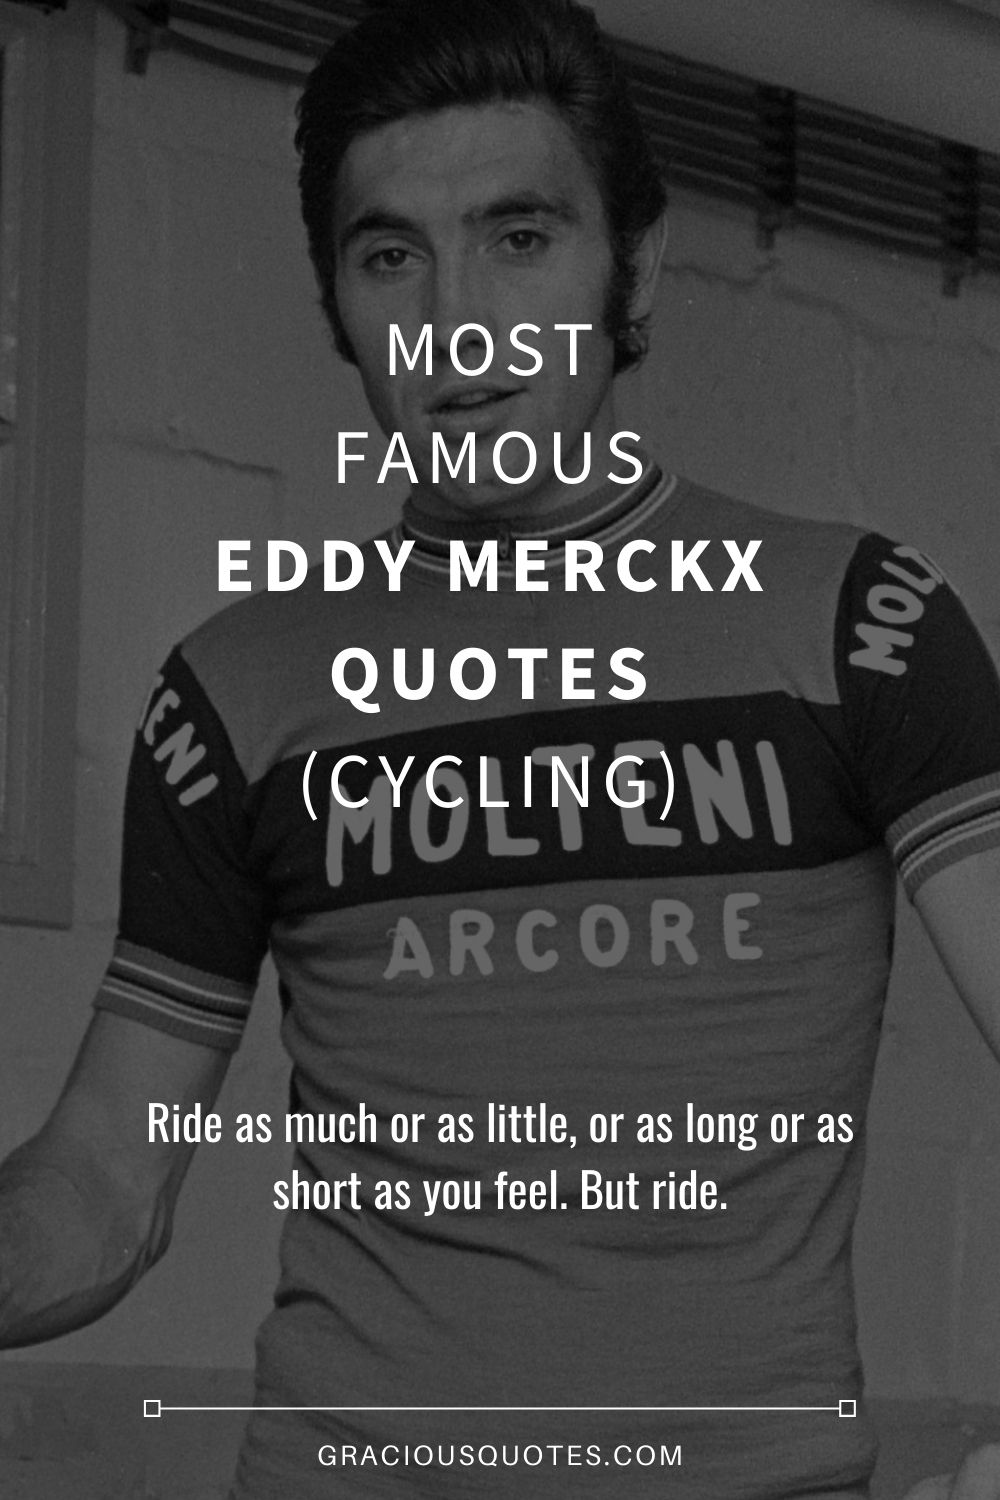 Most Famous Eddy Merckx Quotes (CYCLING) - Gracious Quotes